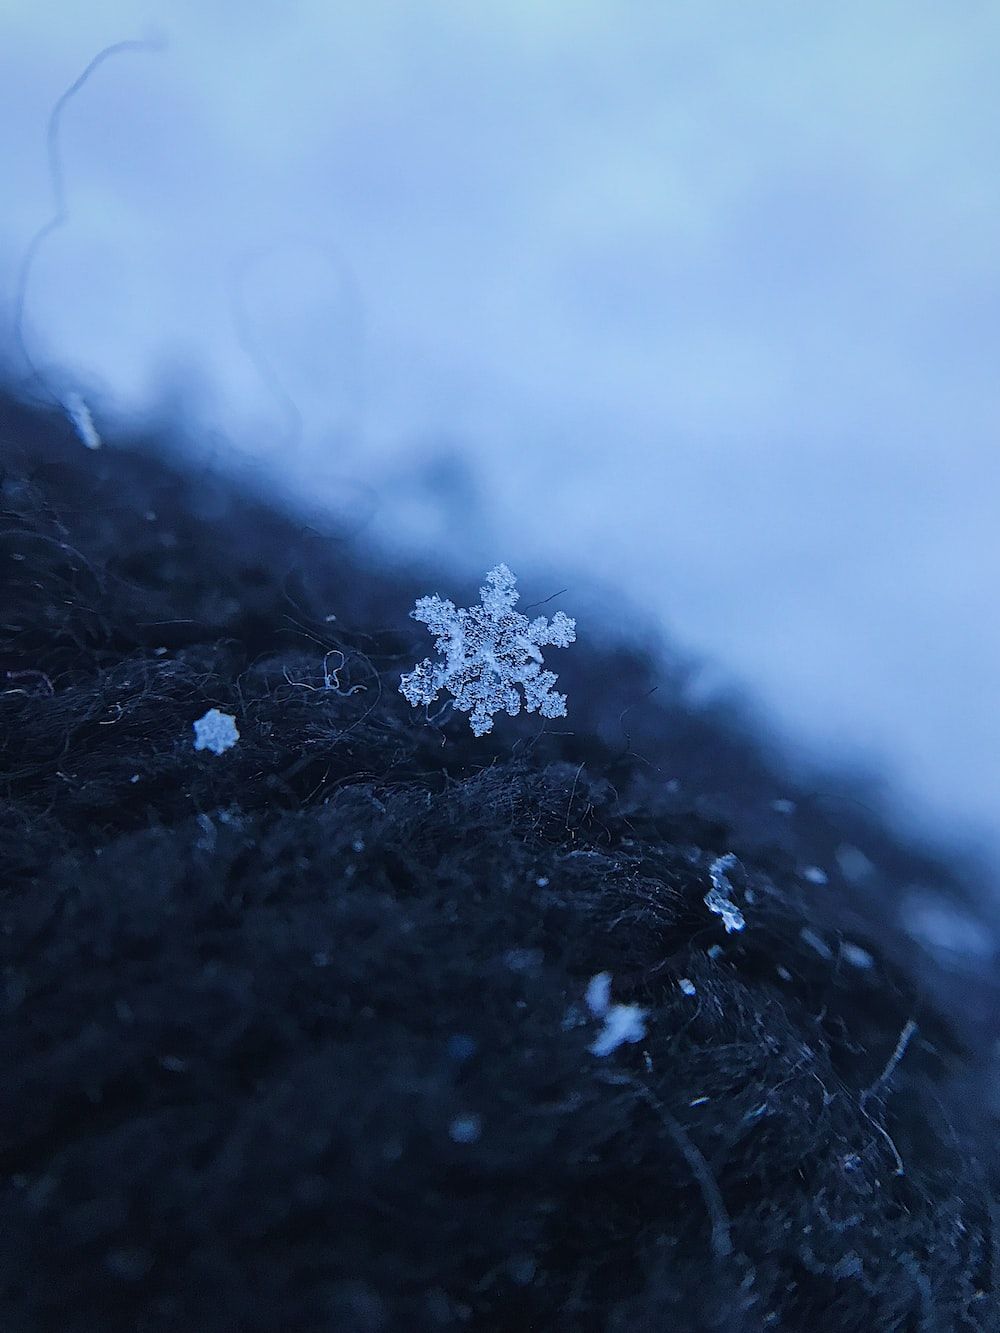 A snowflake rests on a black surface. - Snowflake